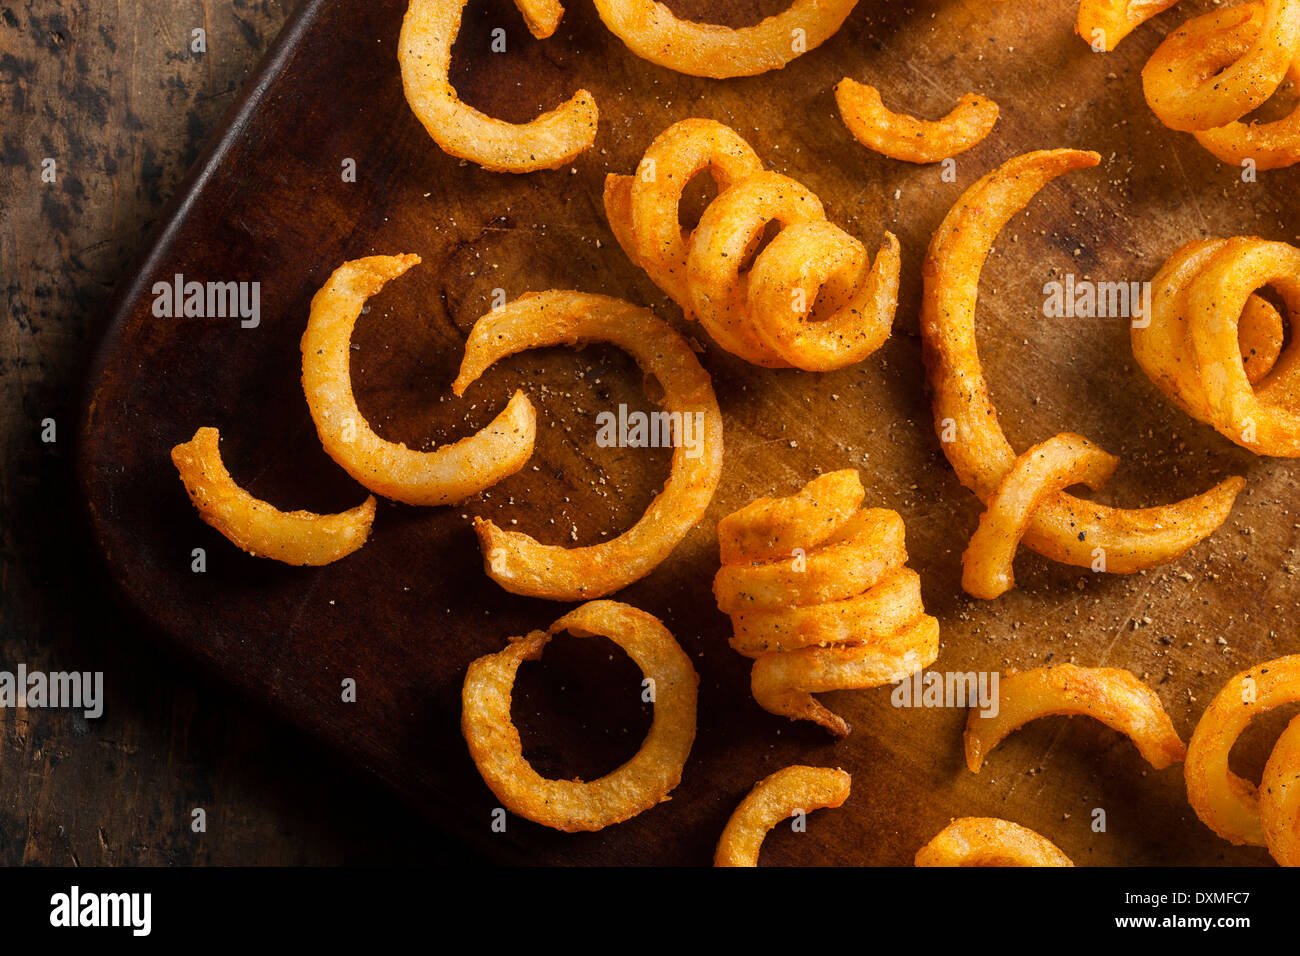 Spicy Seasoned Curly Fries Ready to Eat Stock Photo